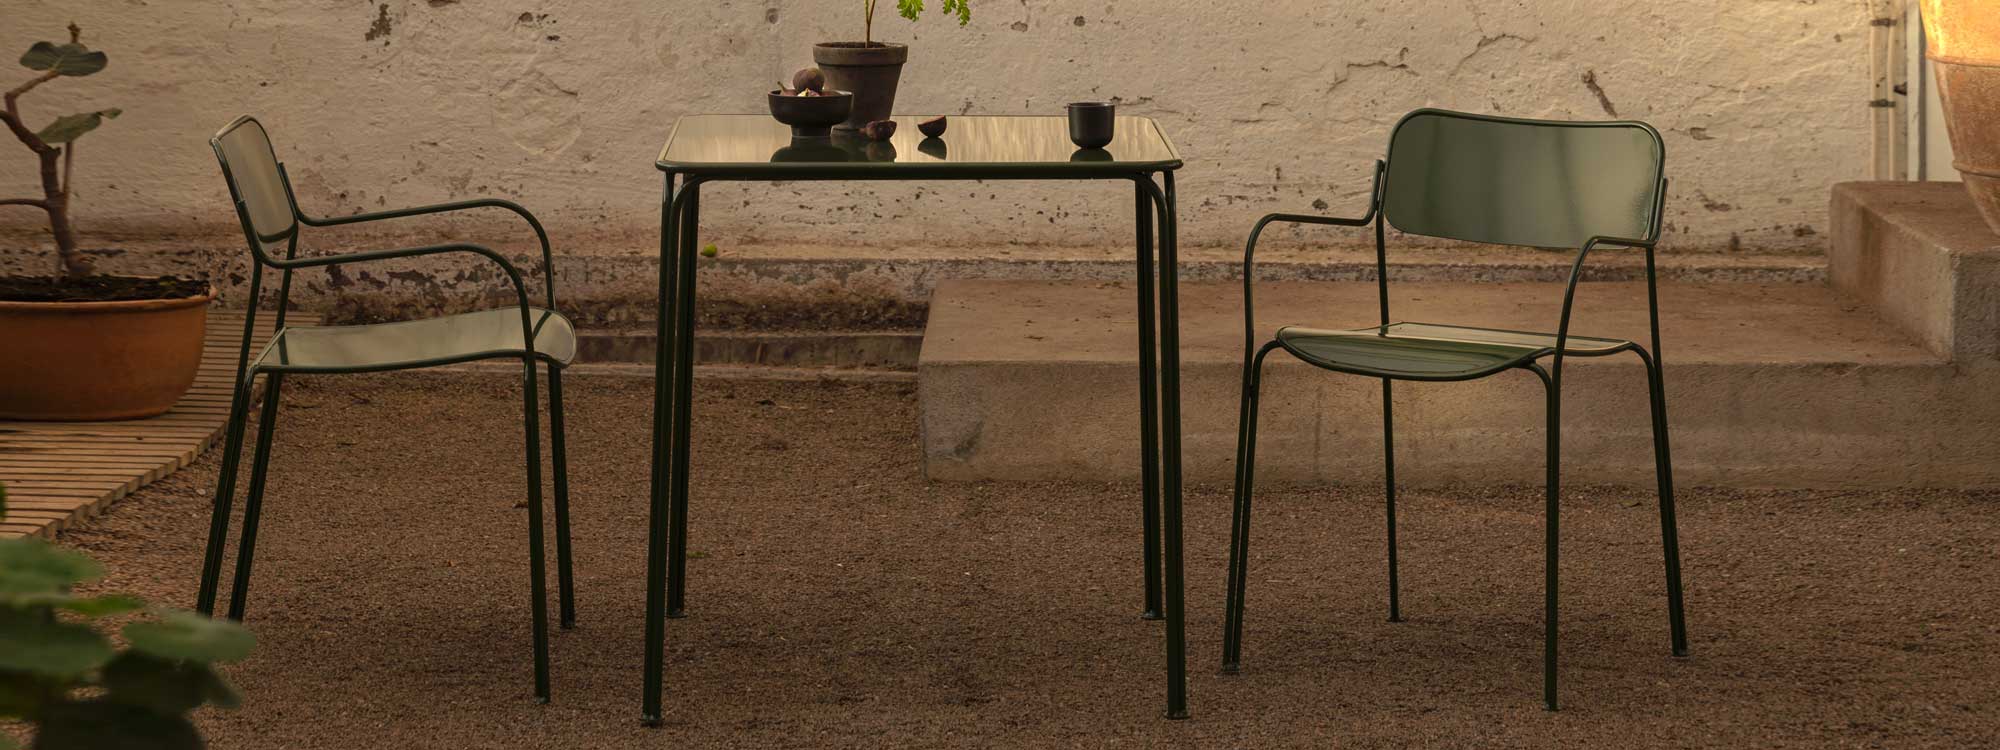 Image of Libelle garden table and chairs with elegant contemporary design by Andreas Engesvik for Grythyttan Stålmöbler